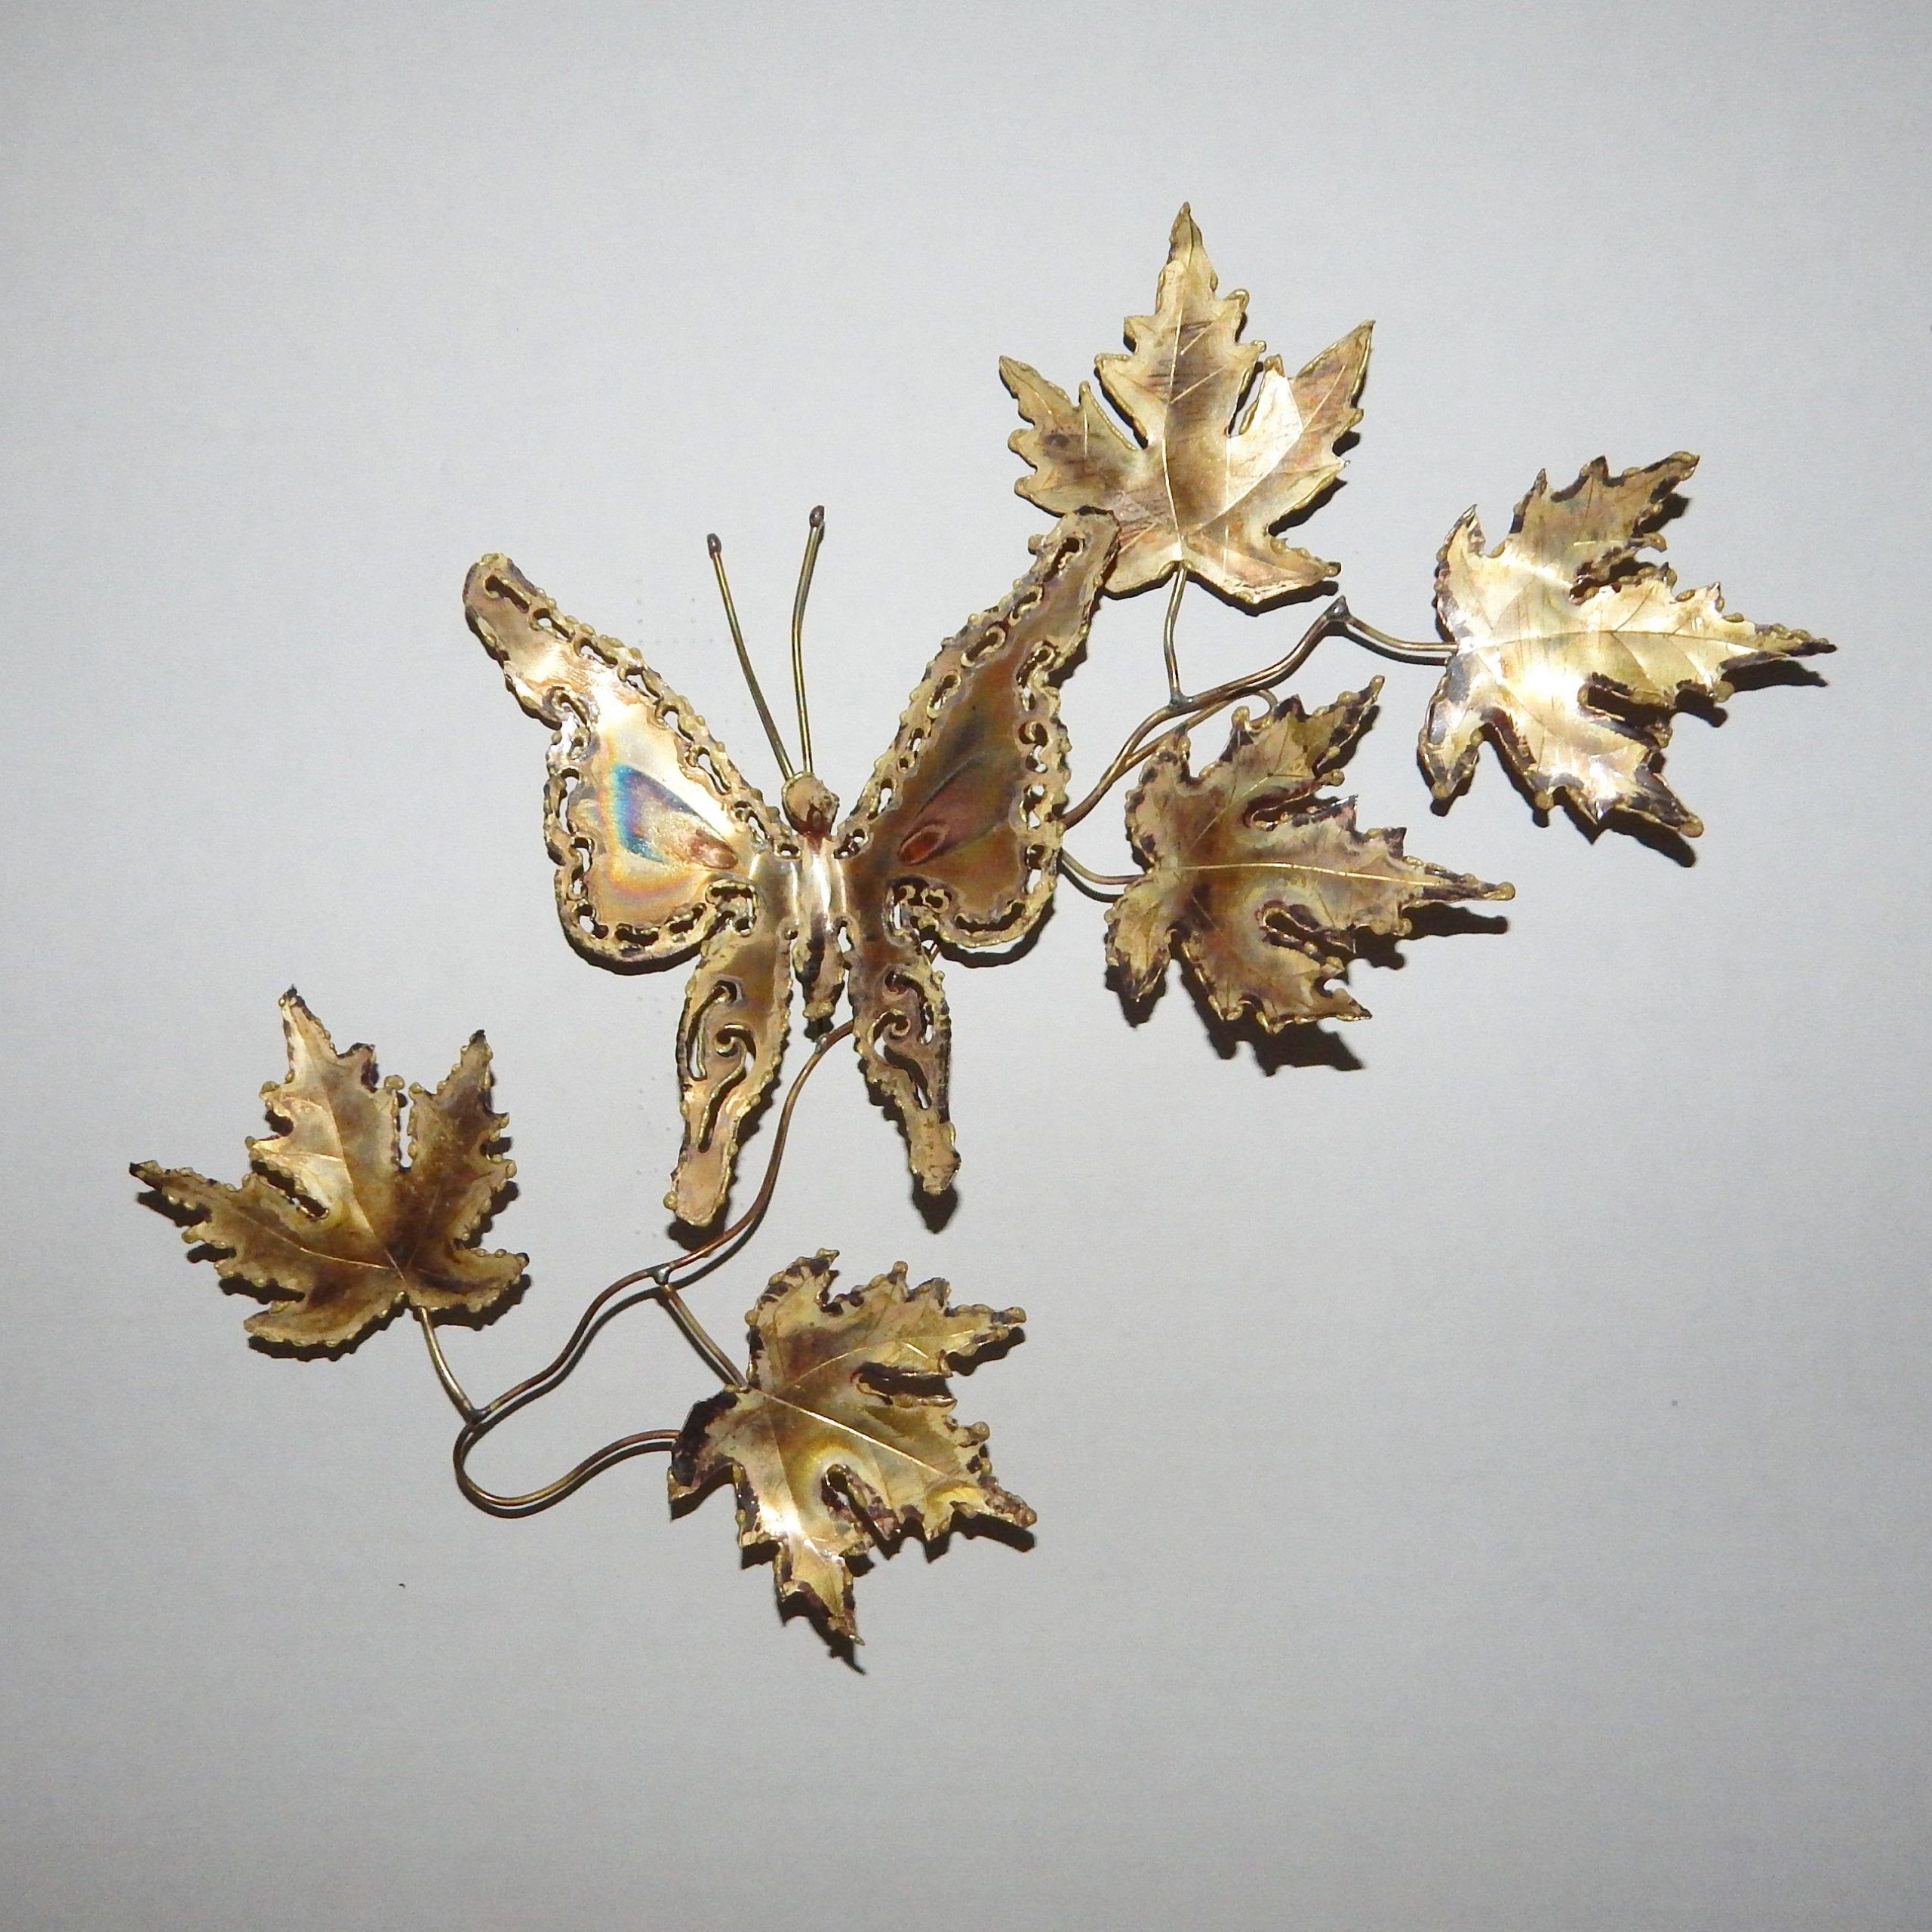 Etsy Within Antique Silver Metal Wall Art Sculptures (View 7 of 15)